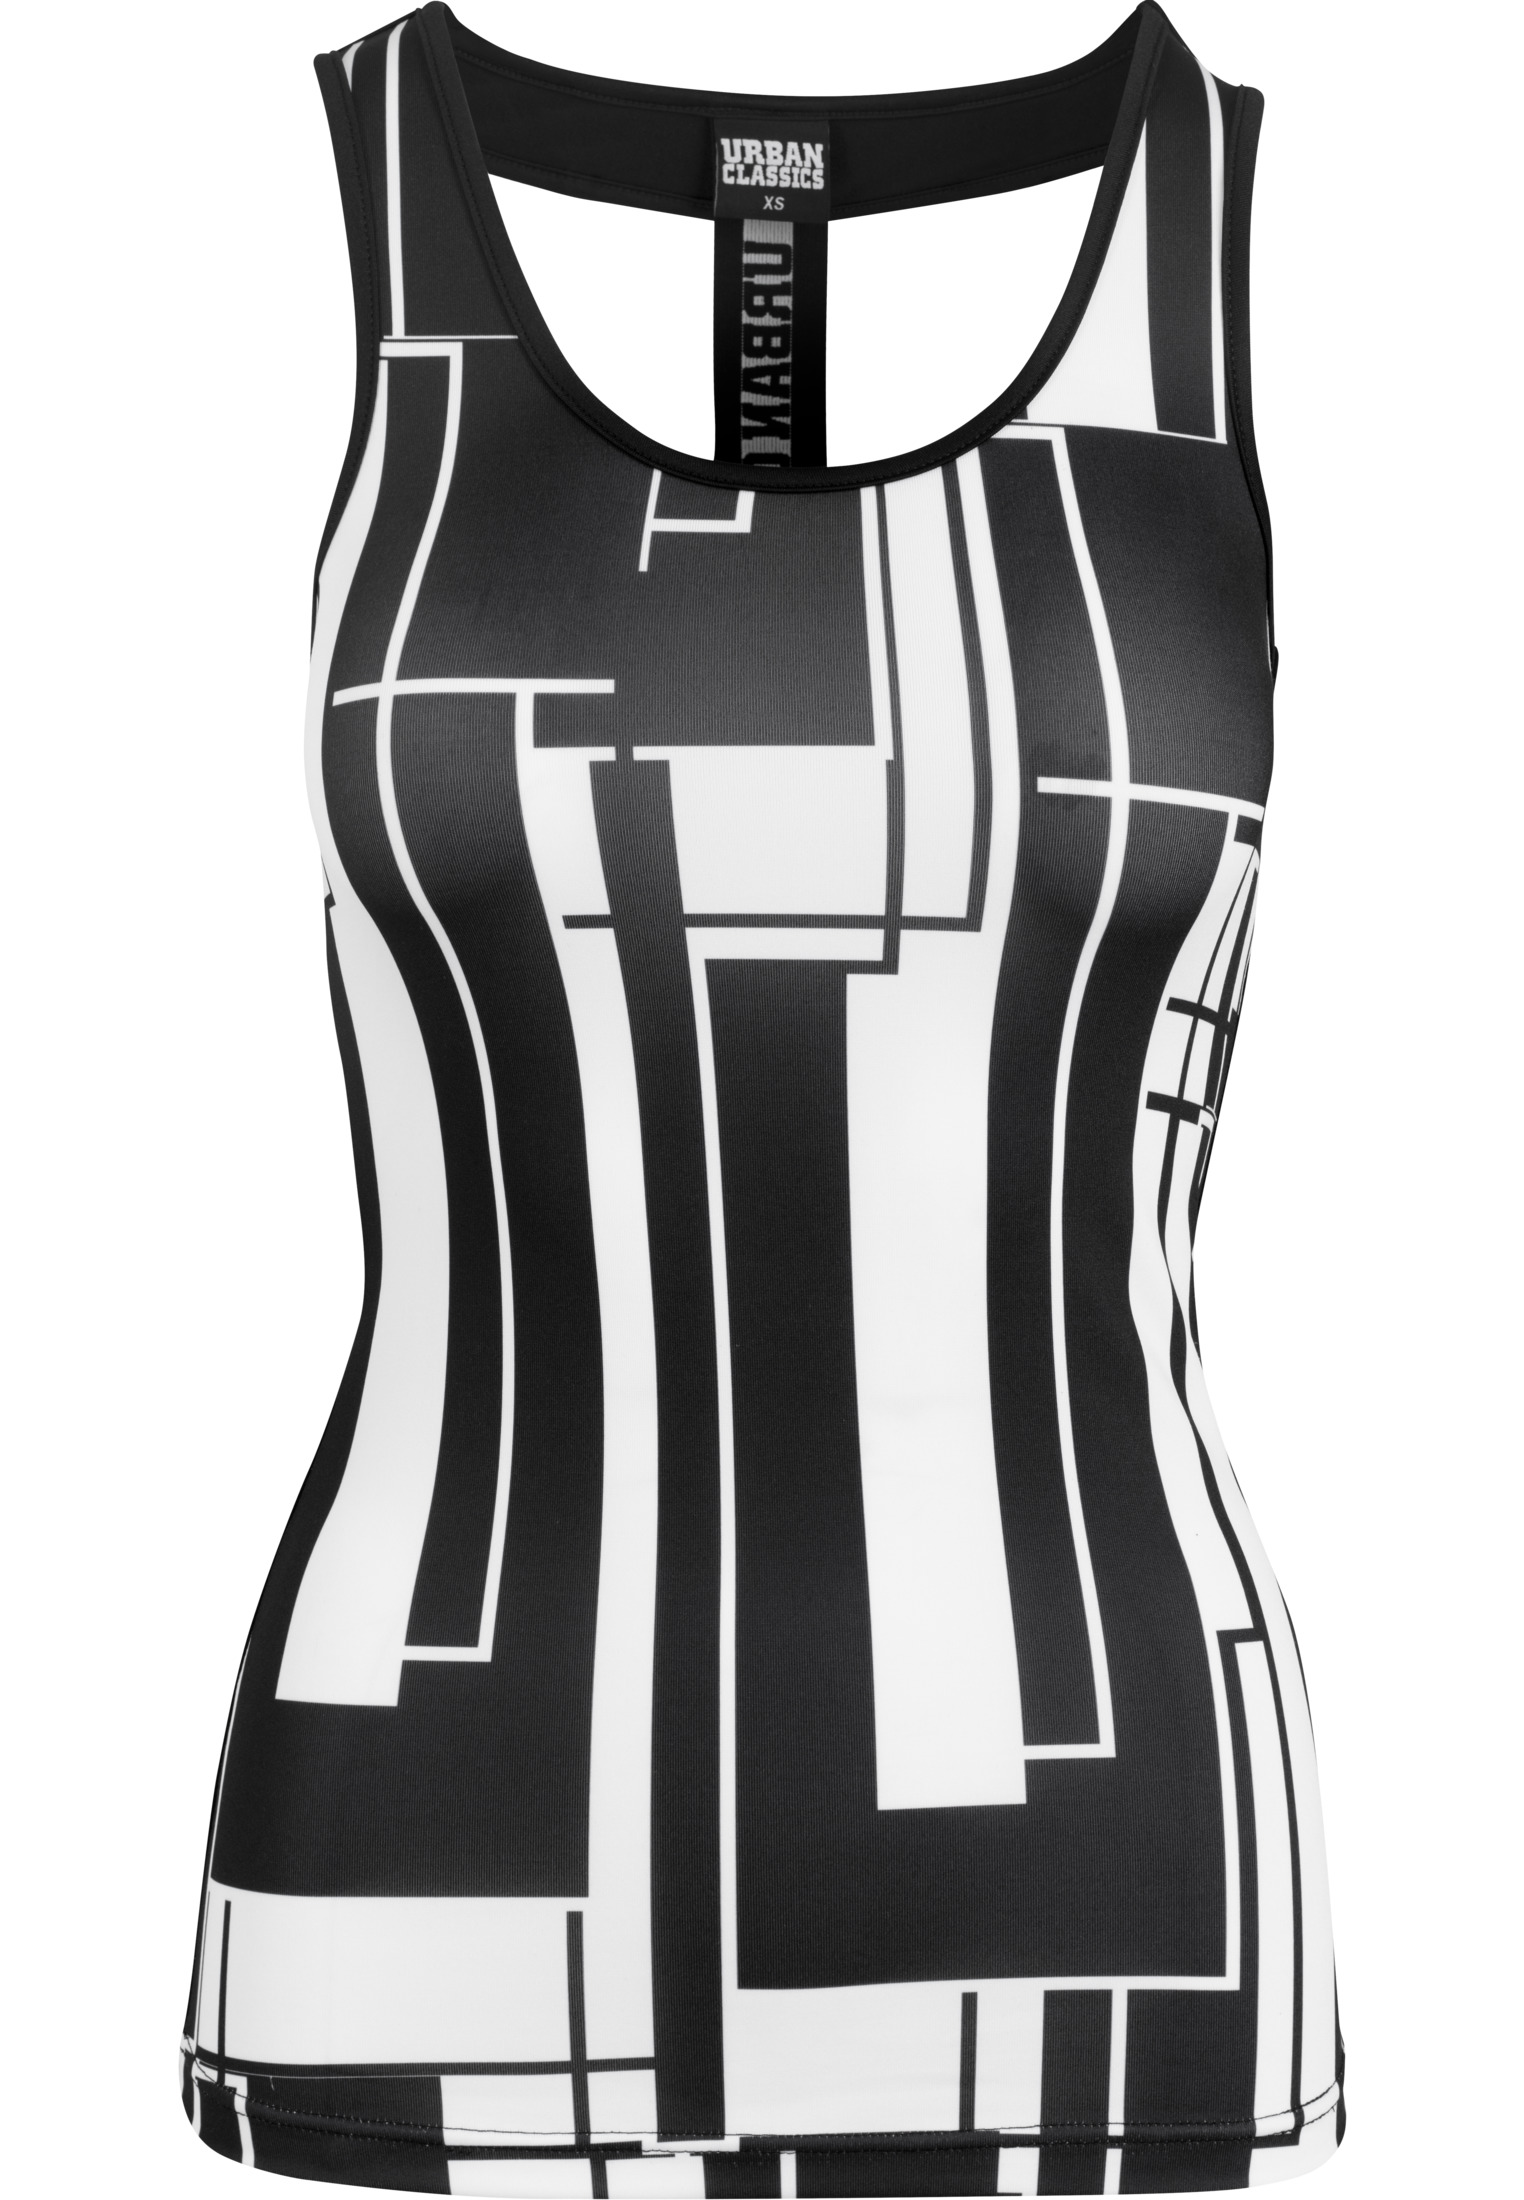 Athleisure Ladies Graphic Sports Top in Farbe black/white